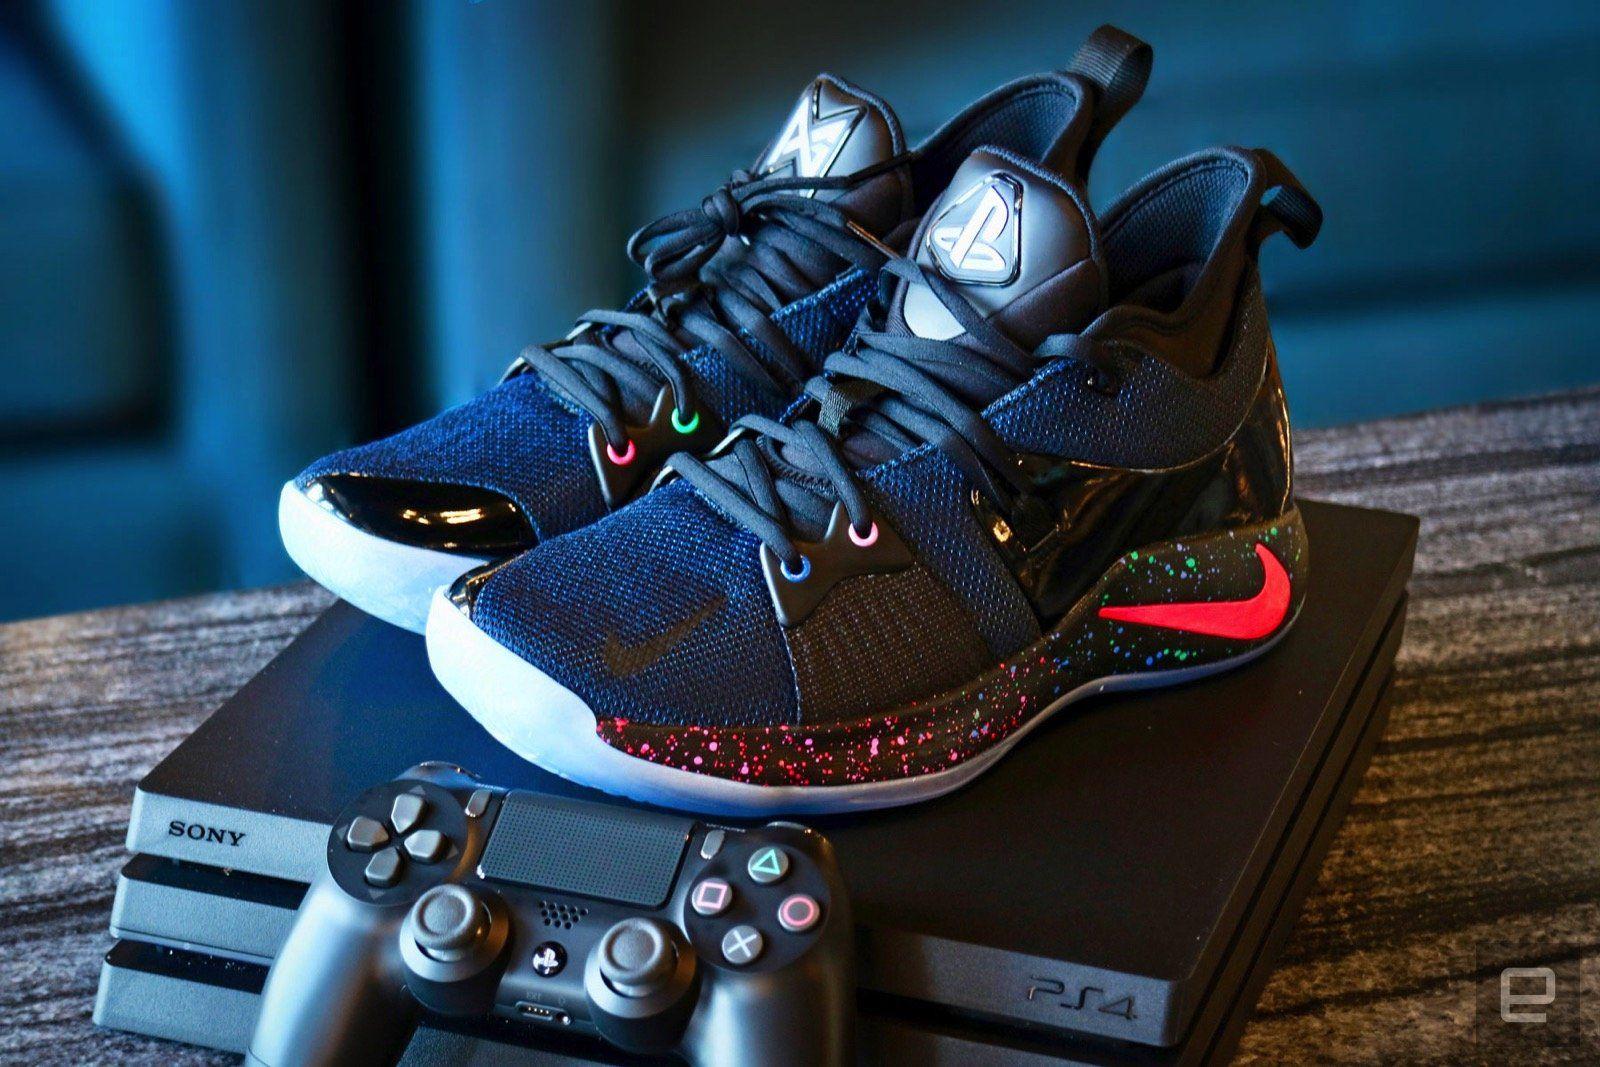 Nike Shoes with the Triangle Logo - Nike's 'PlayStation' shoes make hypebeasts out of gamers